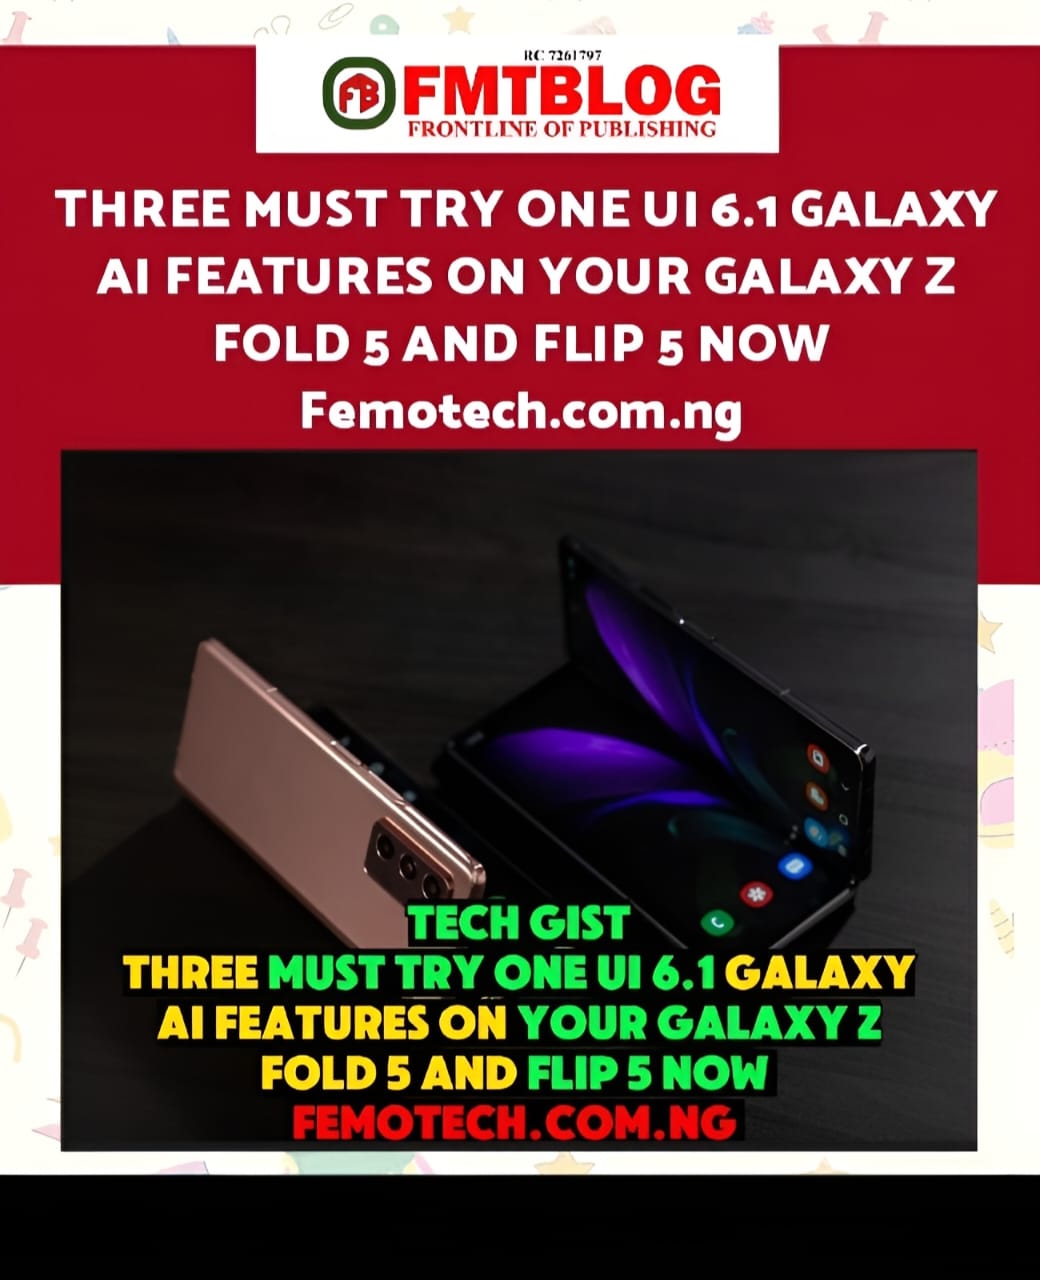 Three Must Try One UI 6.1 Galaxy AI Features On Your Galaxy Z Fold 5 and Flip 5 Now